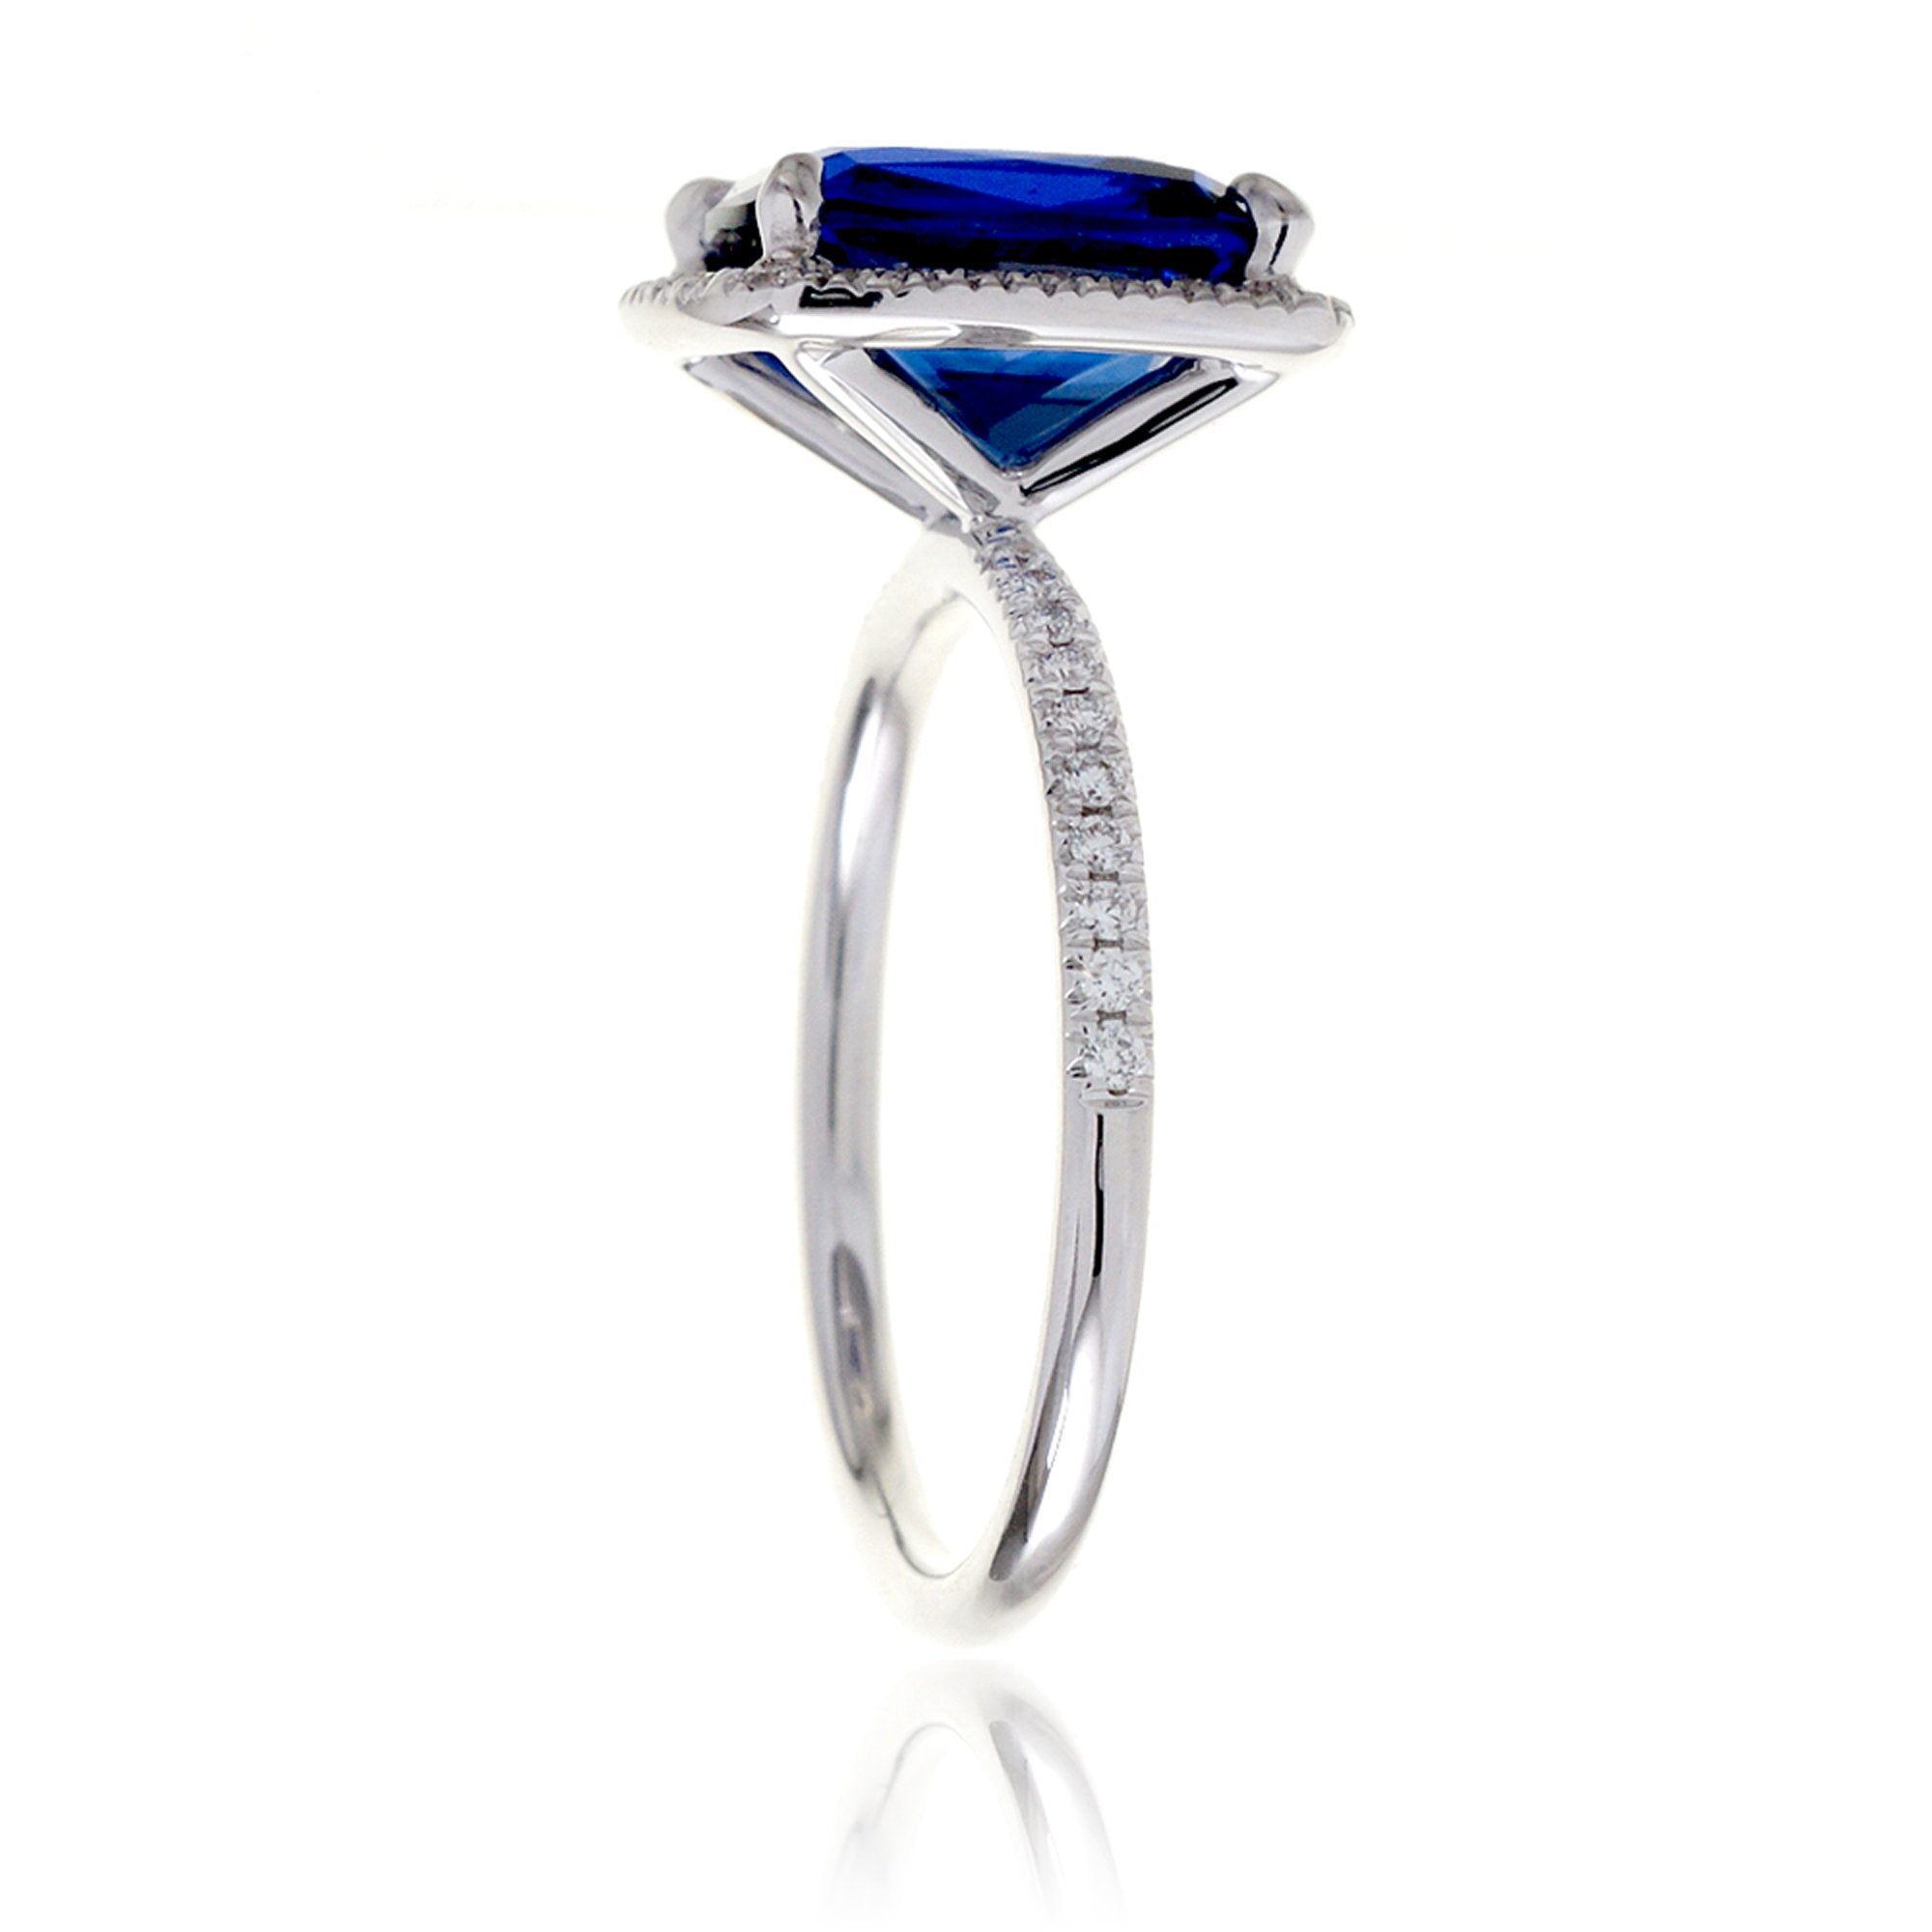 Cushion Sapphire Engagement Ring With A Diamond Halo | The Caitlin Ring In White Gold